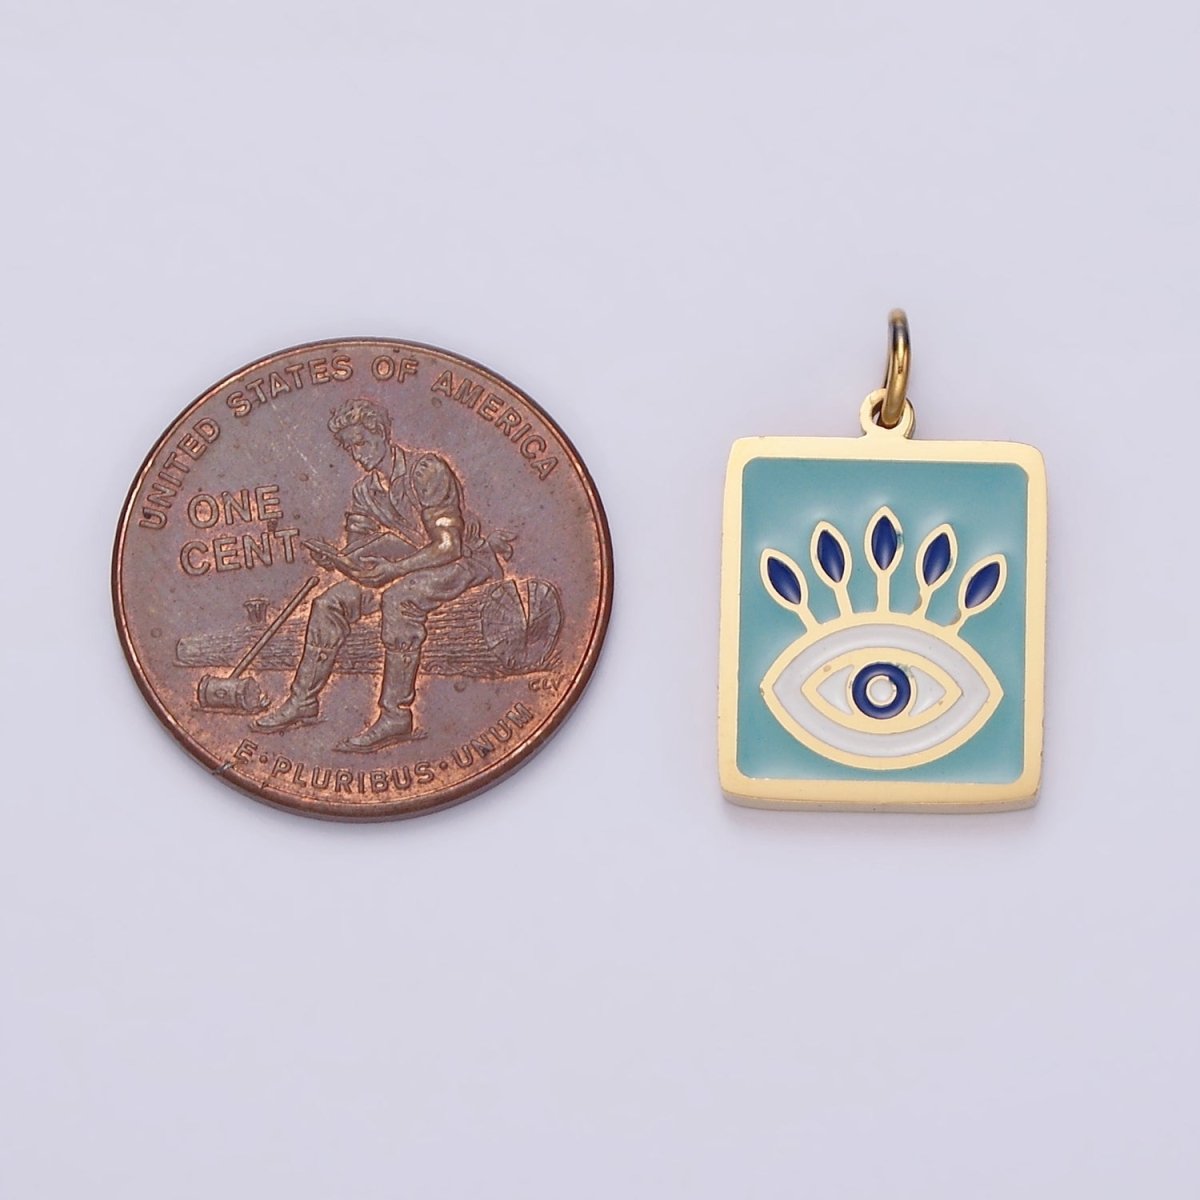 Stainless Steel Gold Eye Pendant Charm for Necklace Bracelet Teal Blue Enamel Jewelry | P-633 - DLUXCA